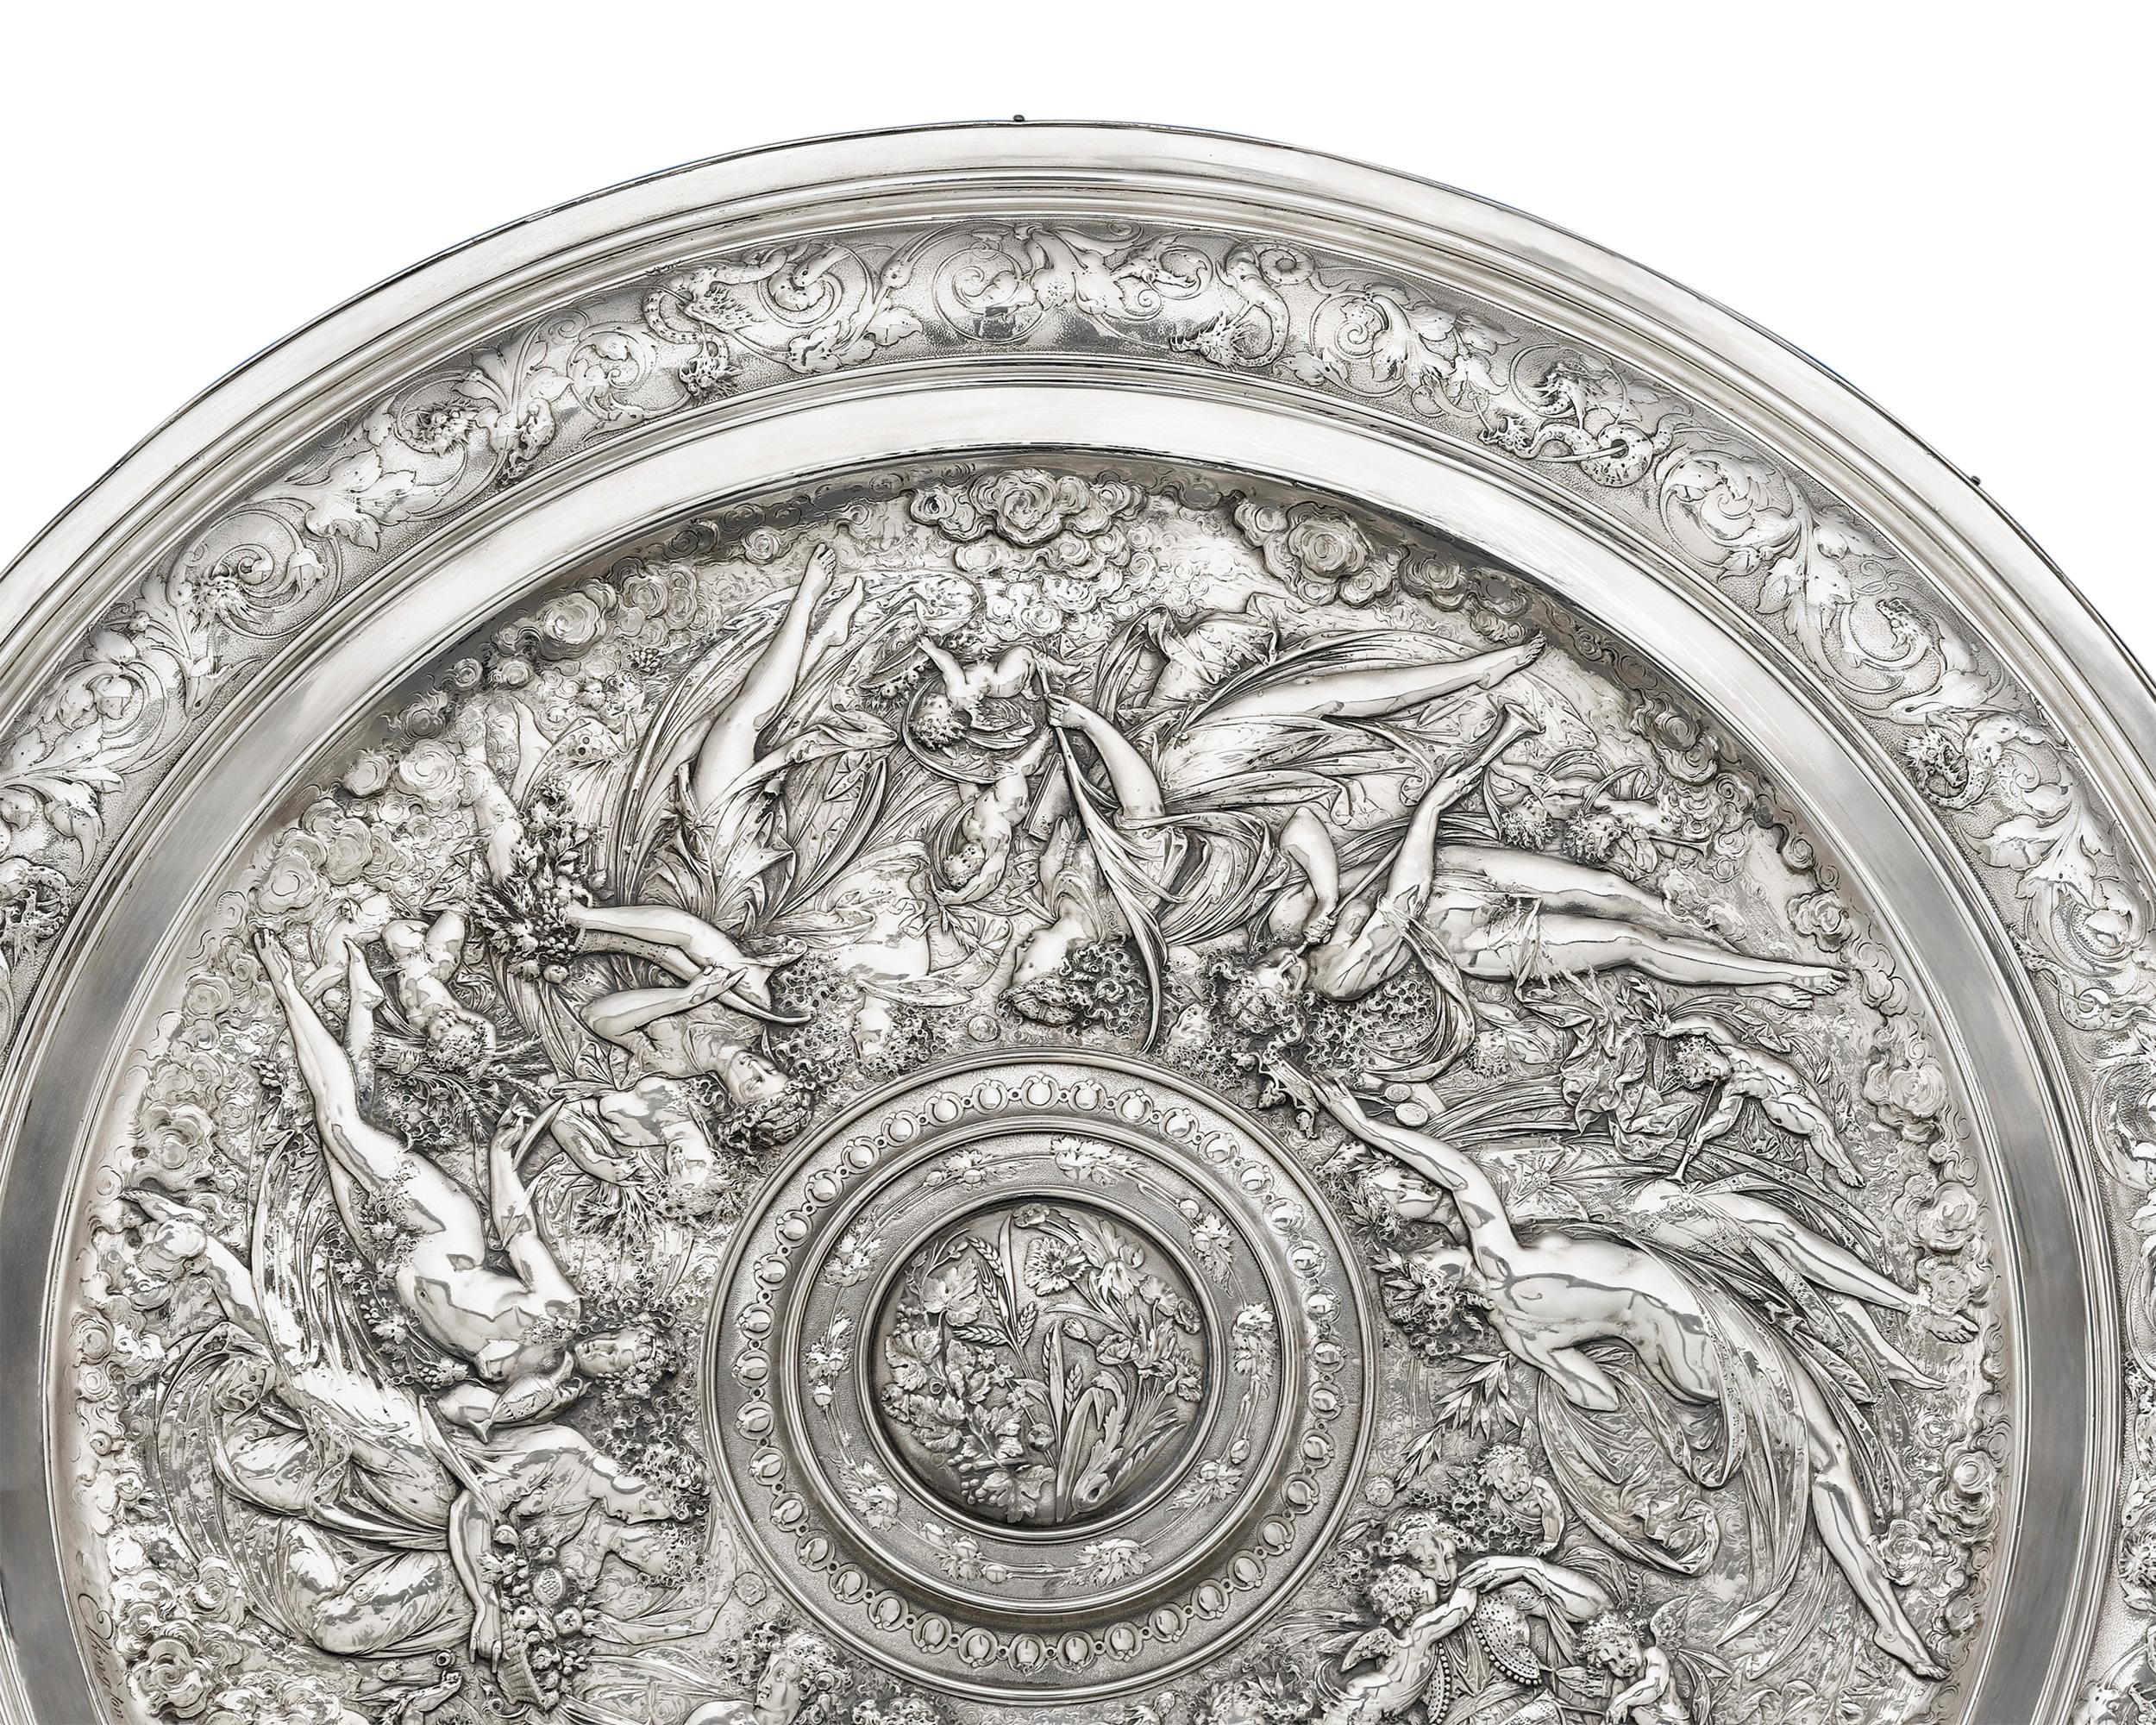 This highly important silver plate charger modelled by French artist Léonard Morel-Ladeuil is based on the sculptor's original design for a wedding gift to the prince and princess of Wales. The exquisite piece was cast by the legendary Elkington &